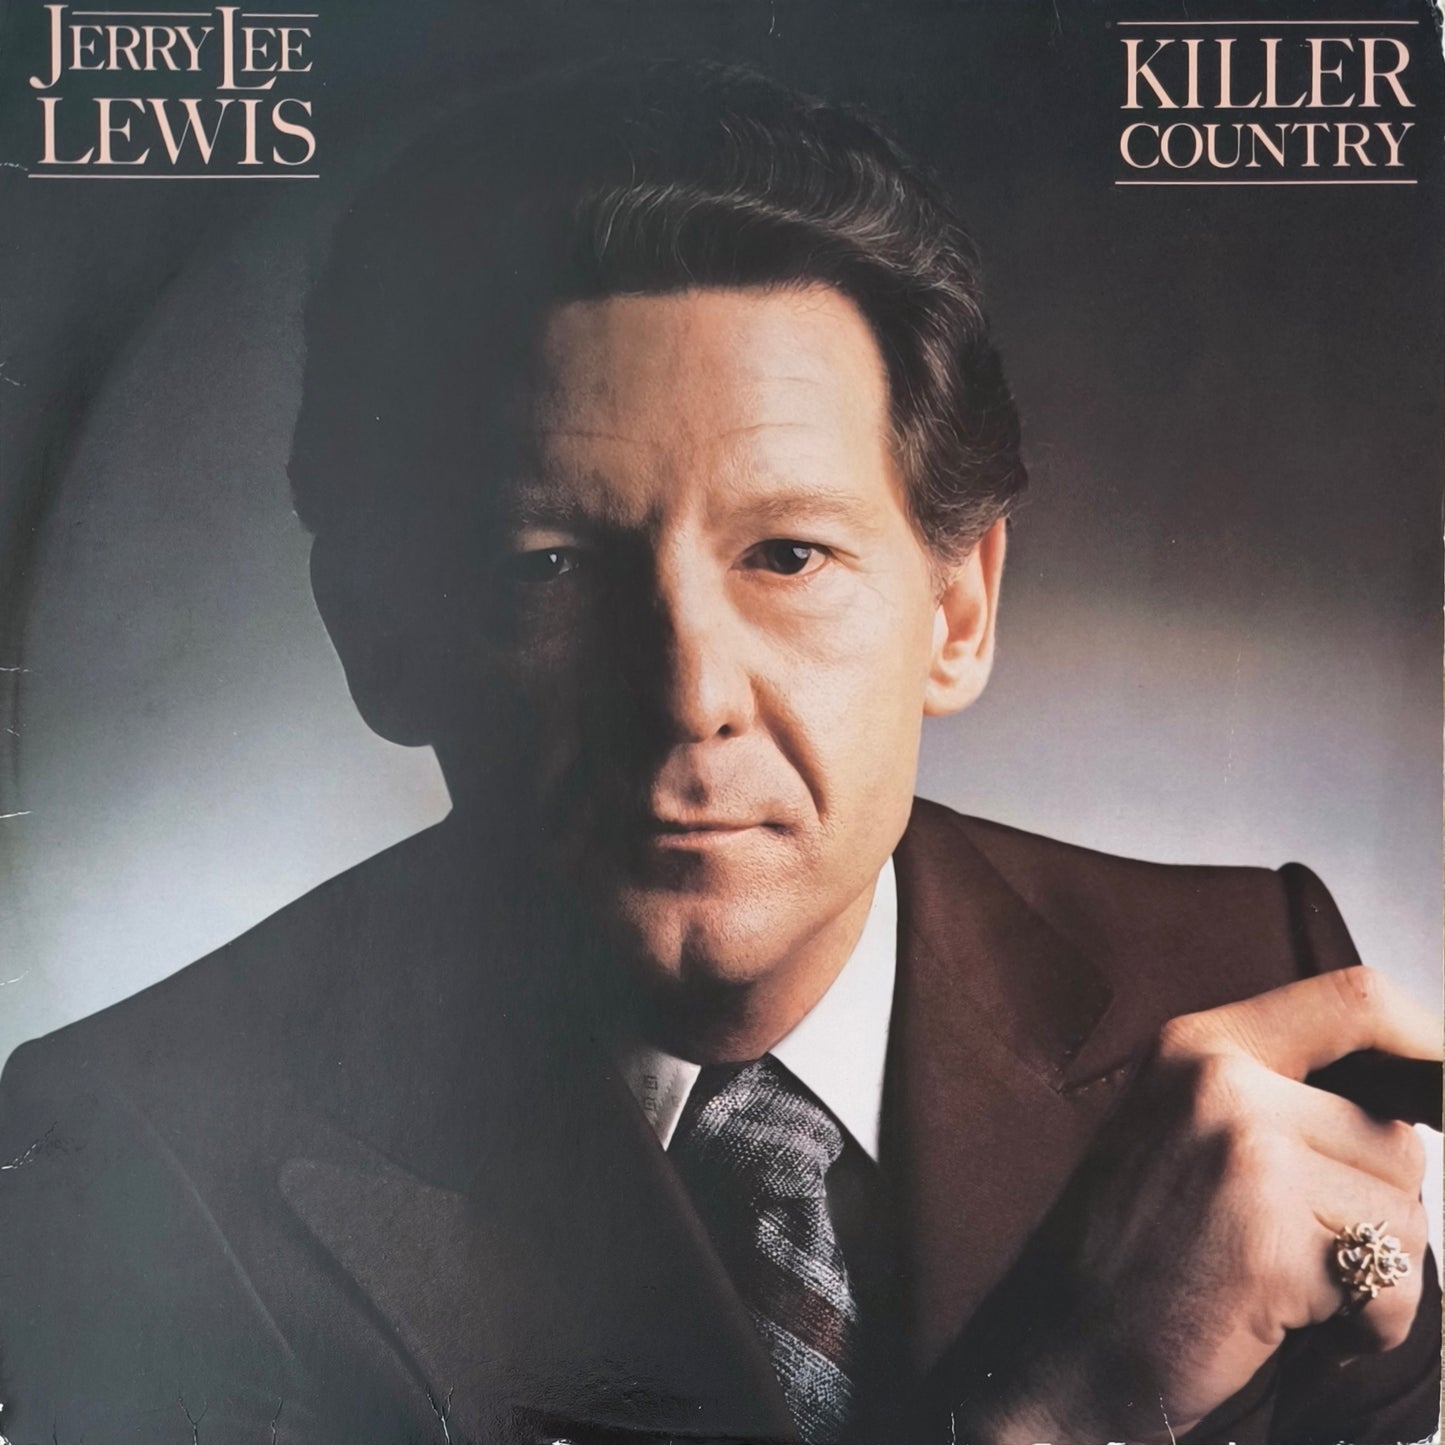 JERRY LEE LEWIS - Killer Country